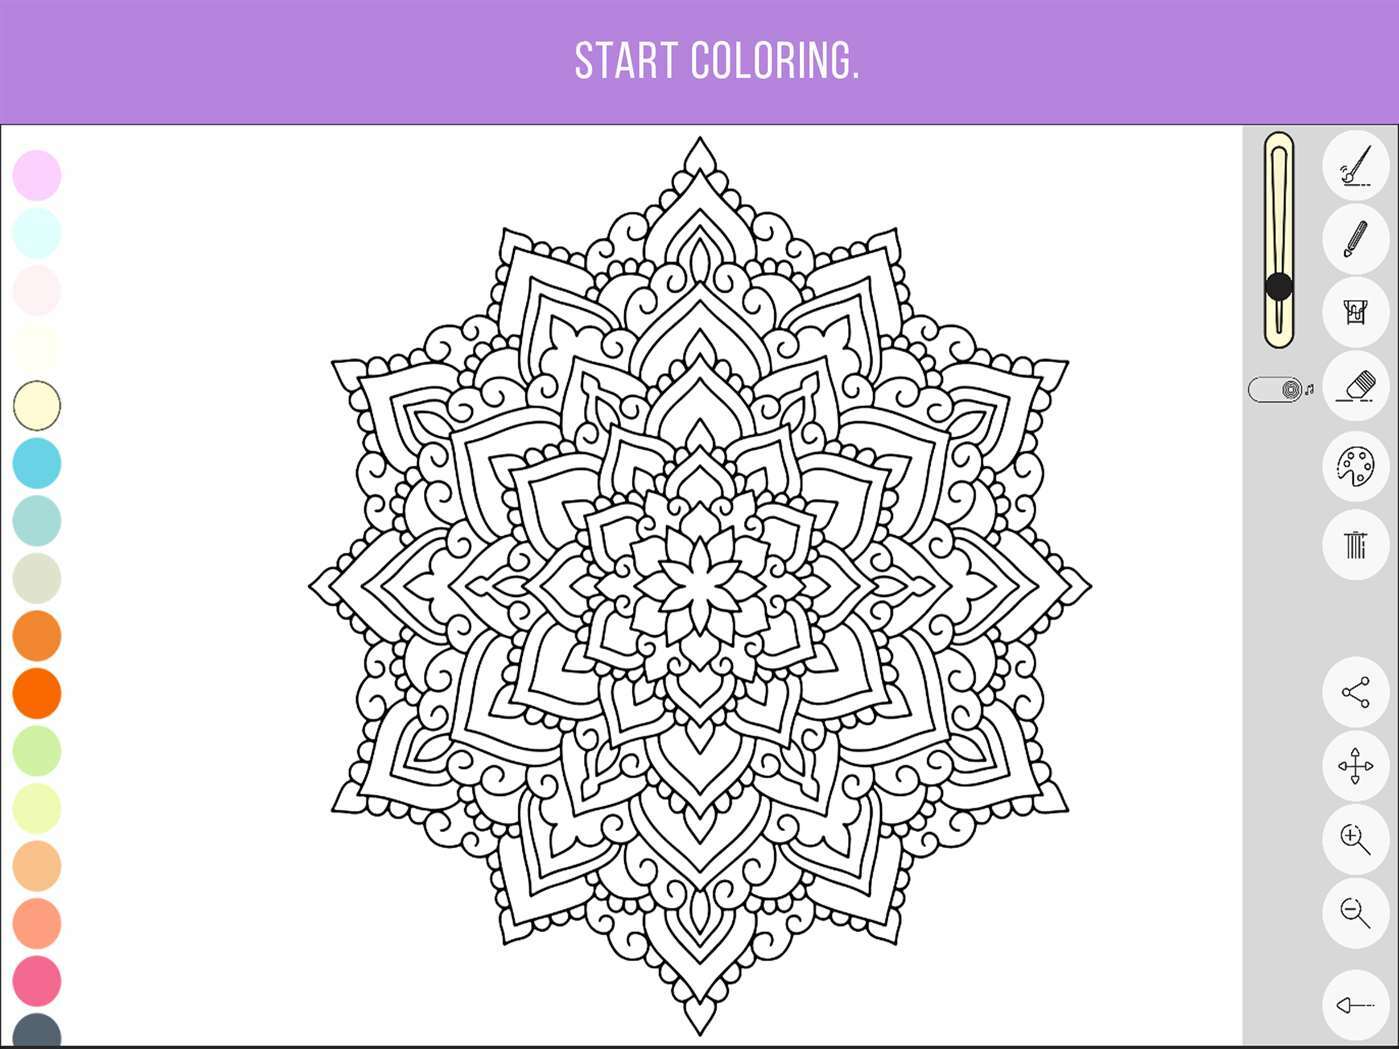 2) Zen: Coloring Book for Adults